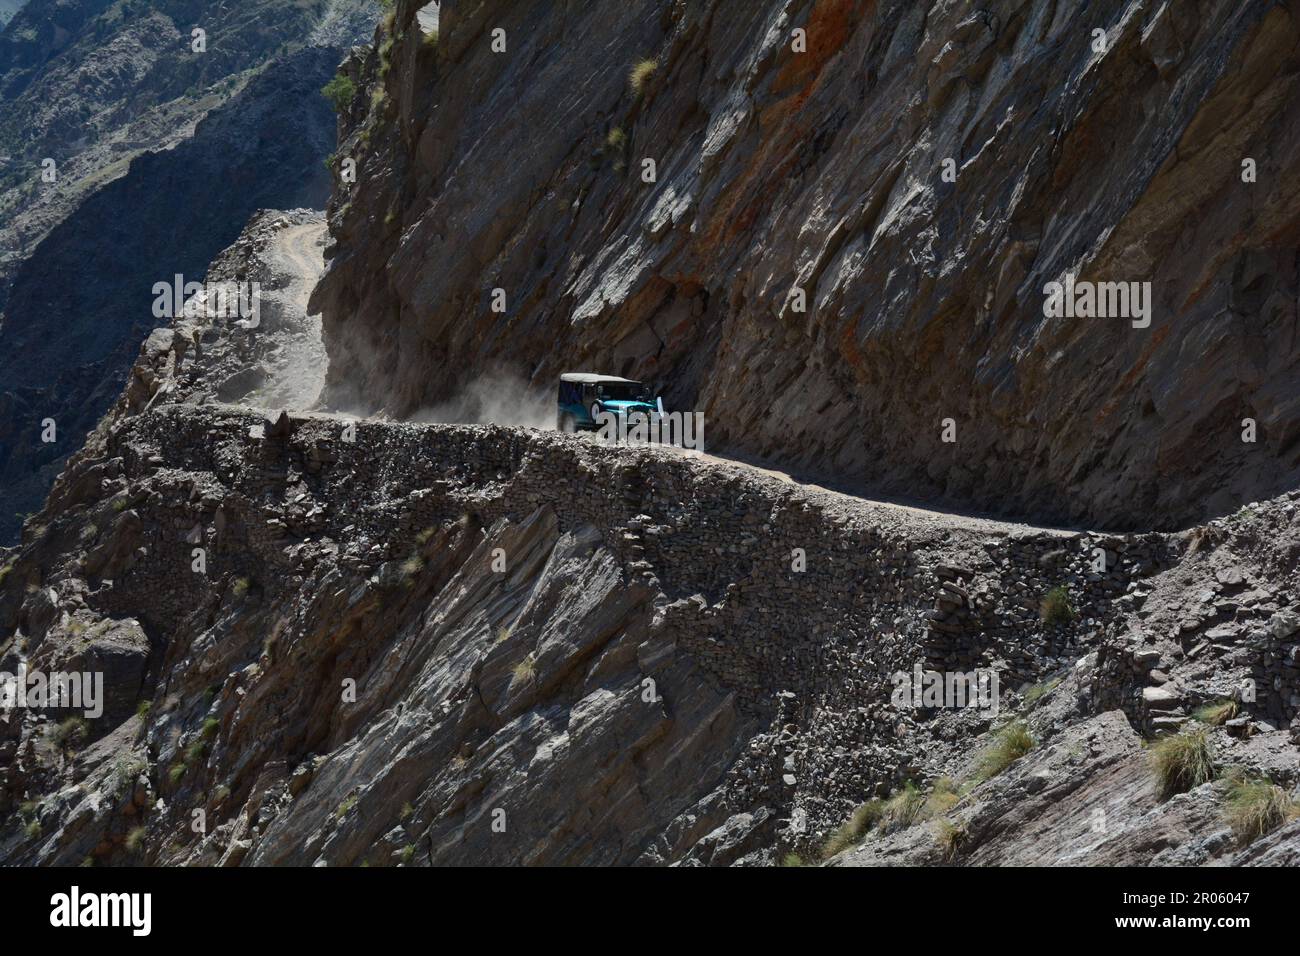 A sturdy jeep navigates a treacherous road, carved between towering mountains in Pakistan Stock Photo